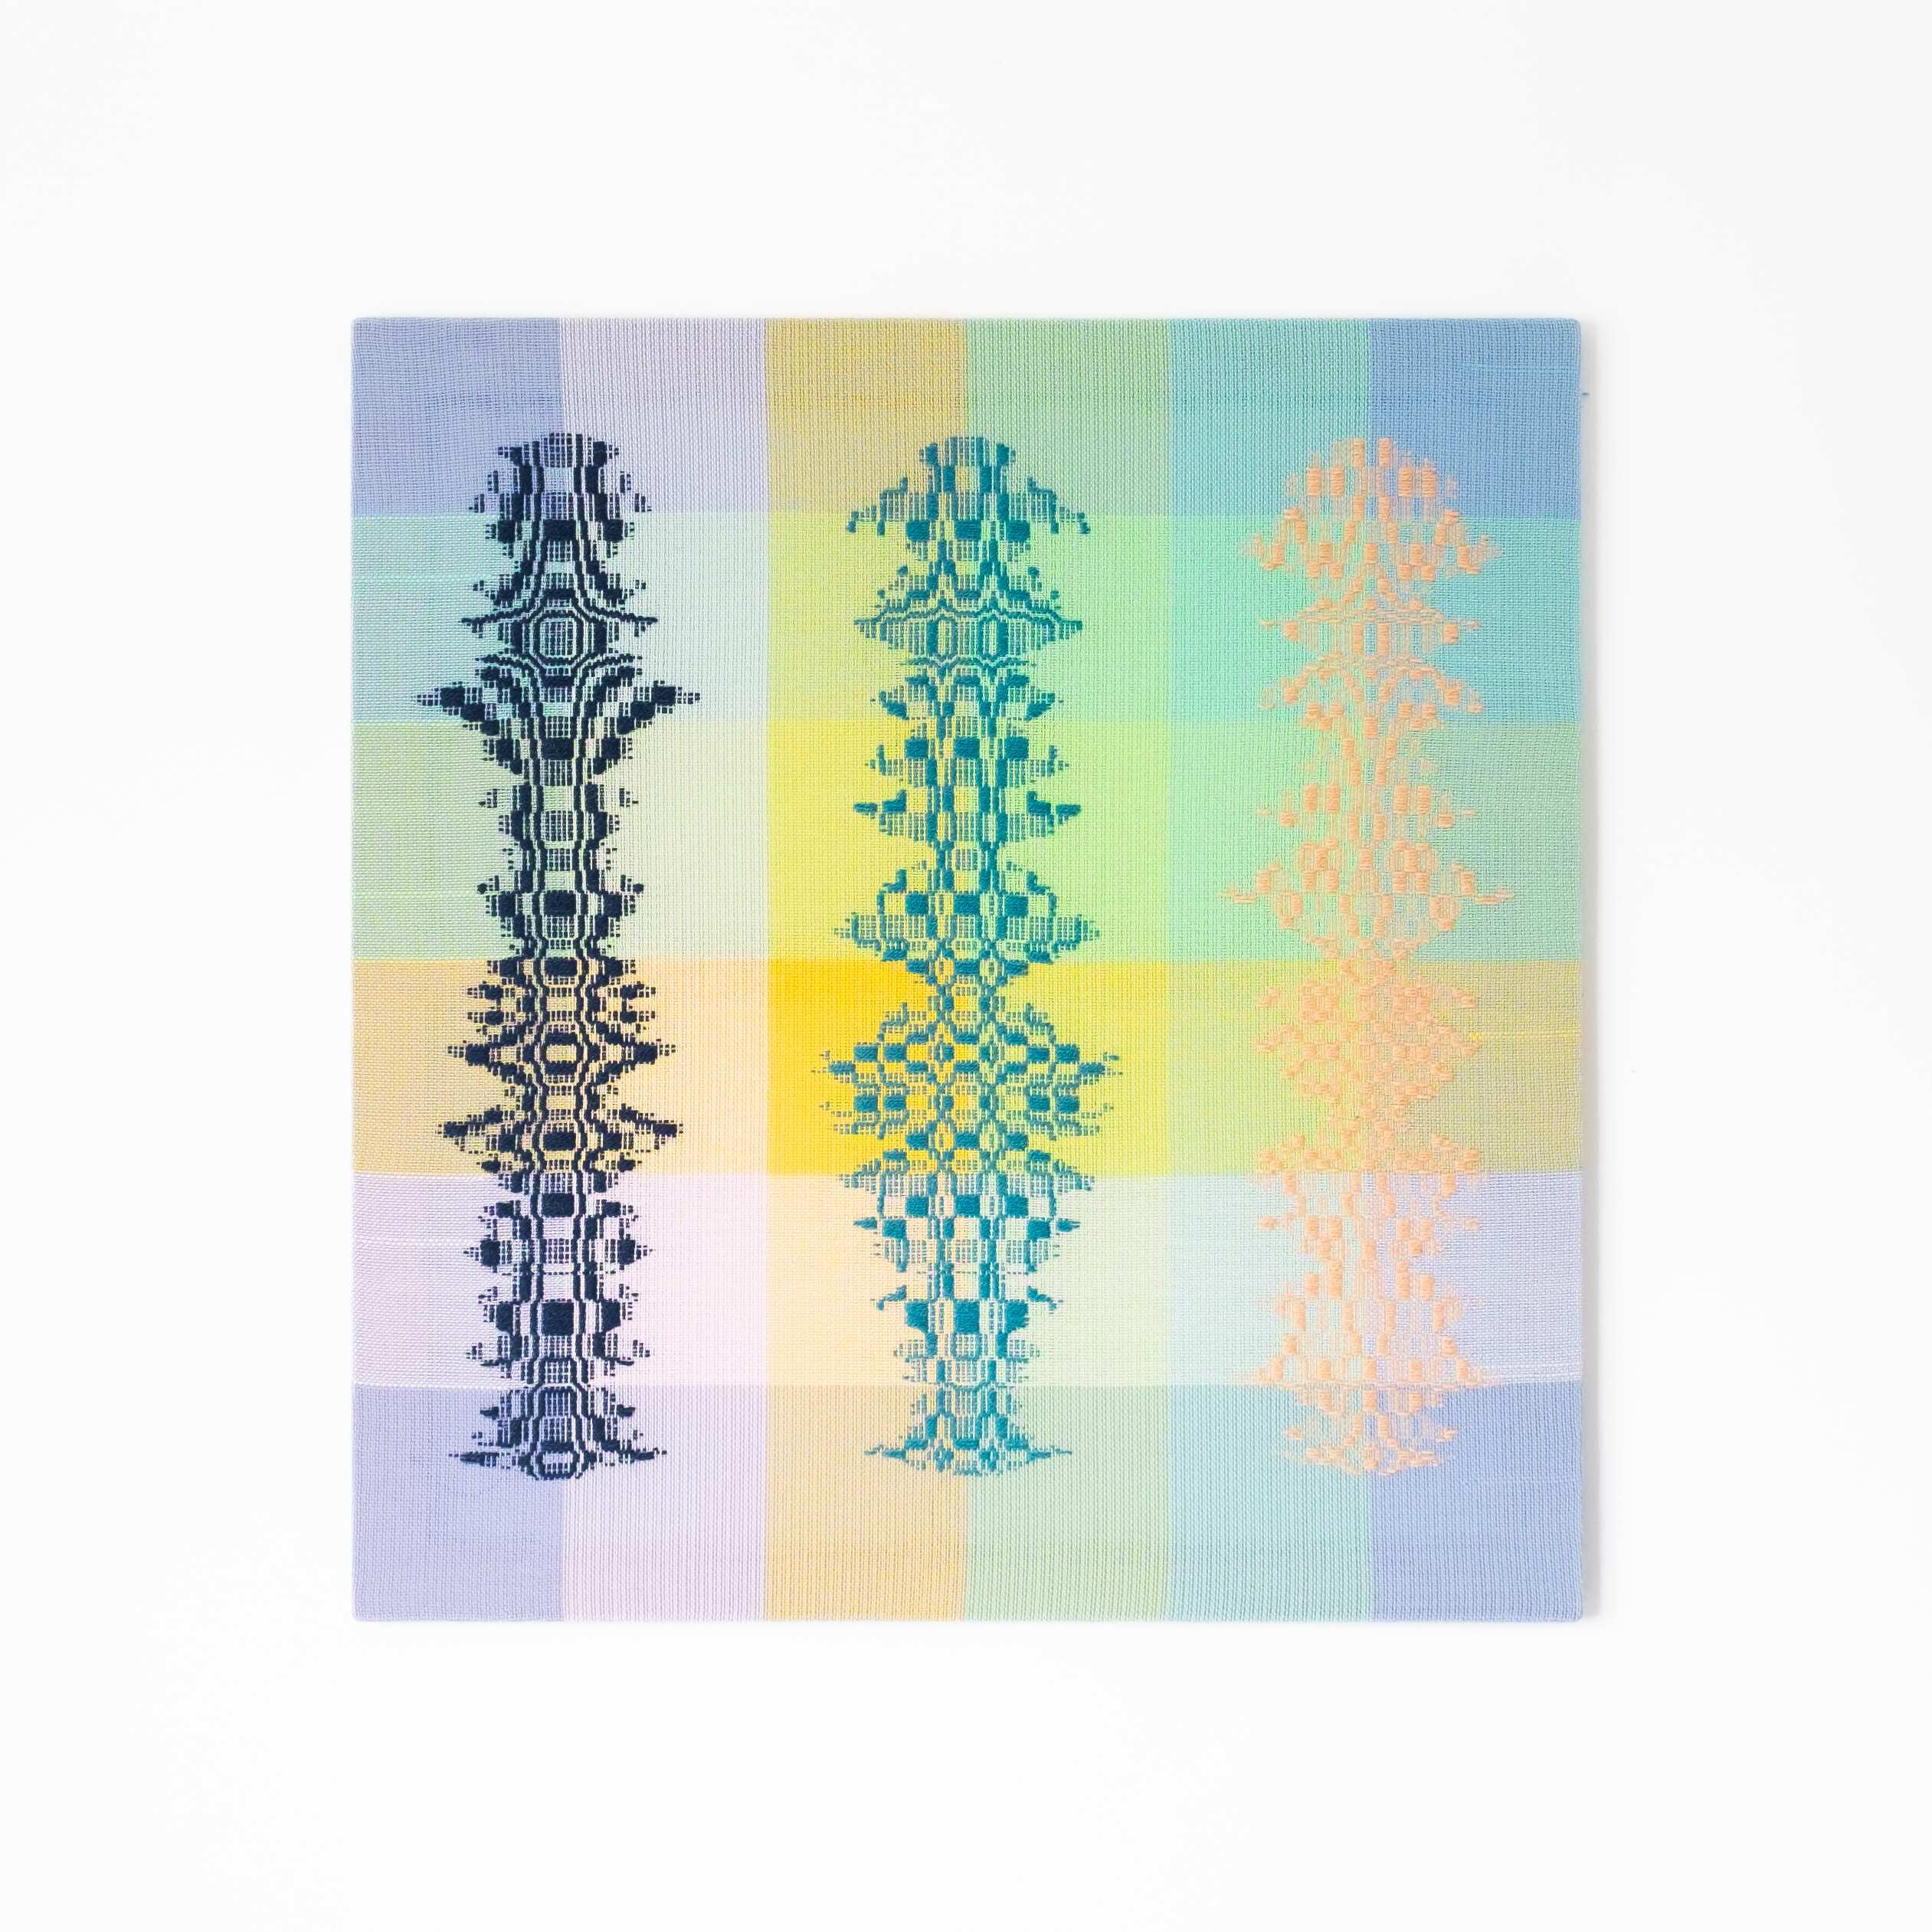 Three beings [navy-teal-peach on pastel ground], Hand-woven cotton and wool yarn, 2022